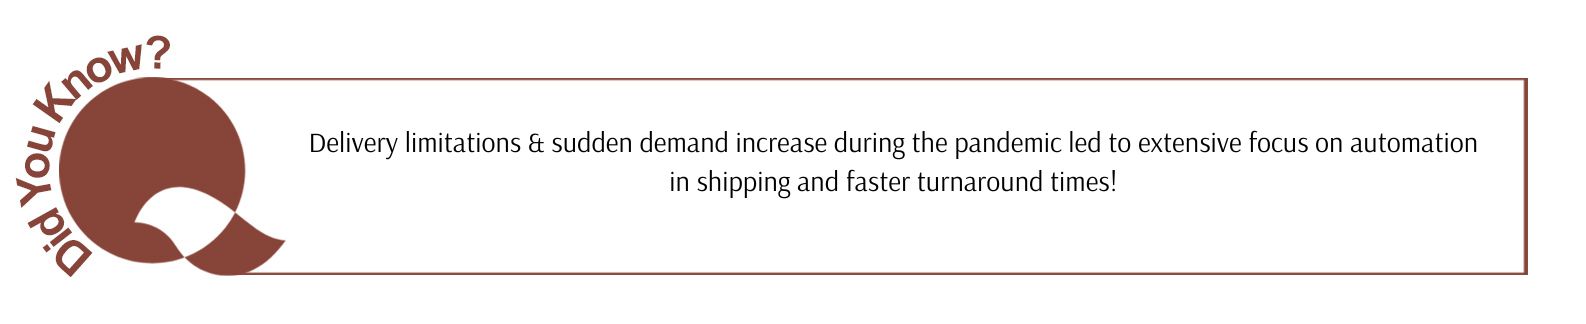 Delivery limitations & sudden demand increase during the pandemic led to extensive focus on automation in shipping and faster turnaround times!